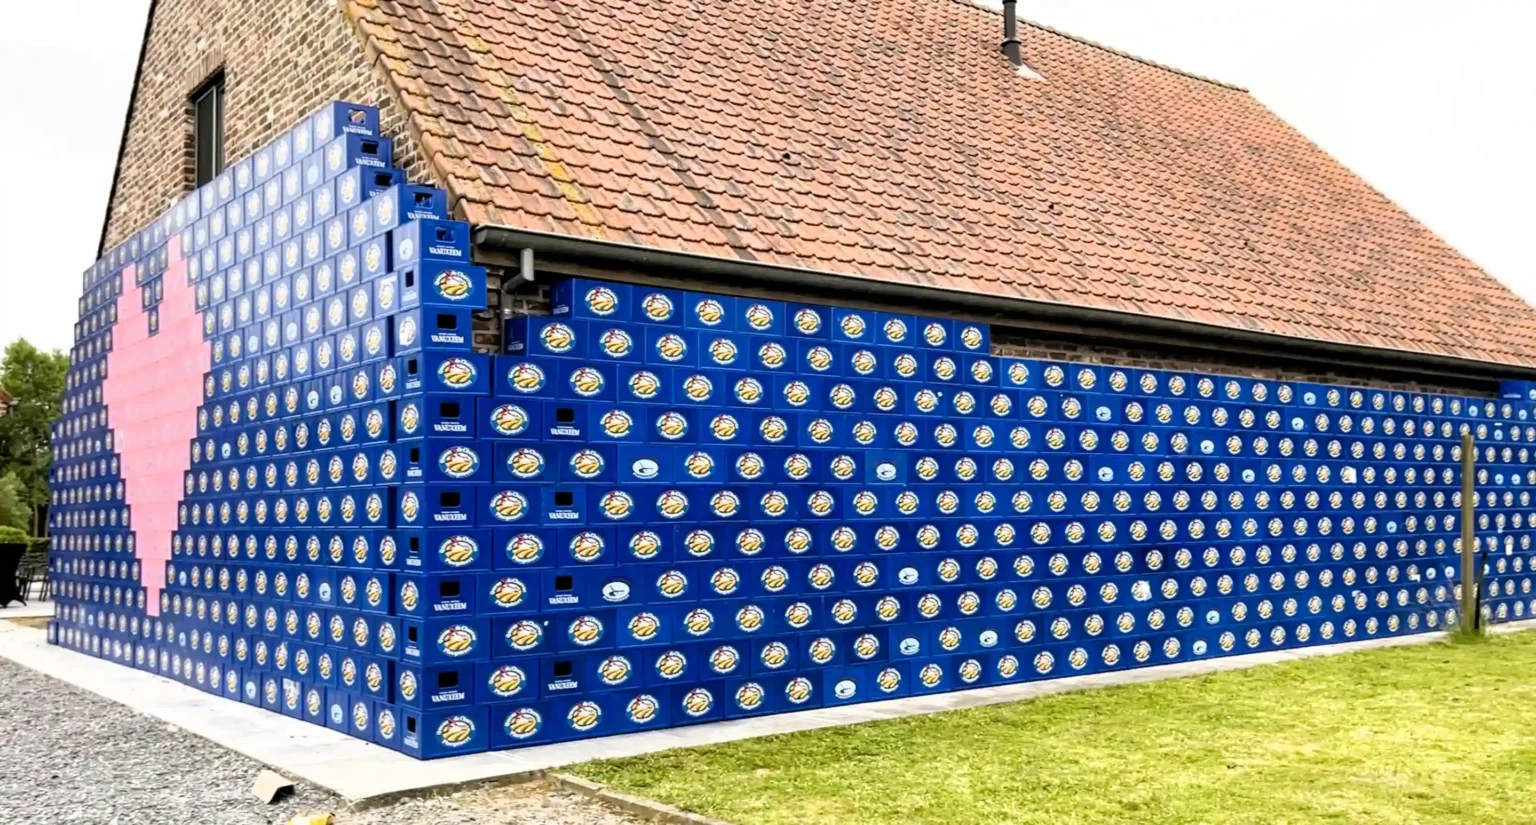 Newlyweds Jérémy Desmet and Maïté Beernaert returned home to find their house barricaded with 2,000 beer crates by friends, filled with Jérémy's favorite beer, in a hilarious tradition.